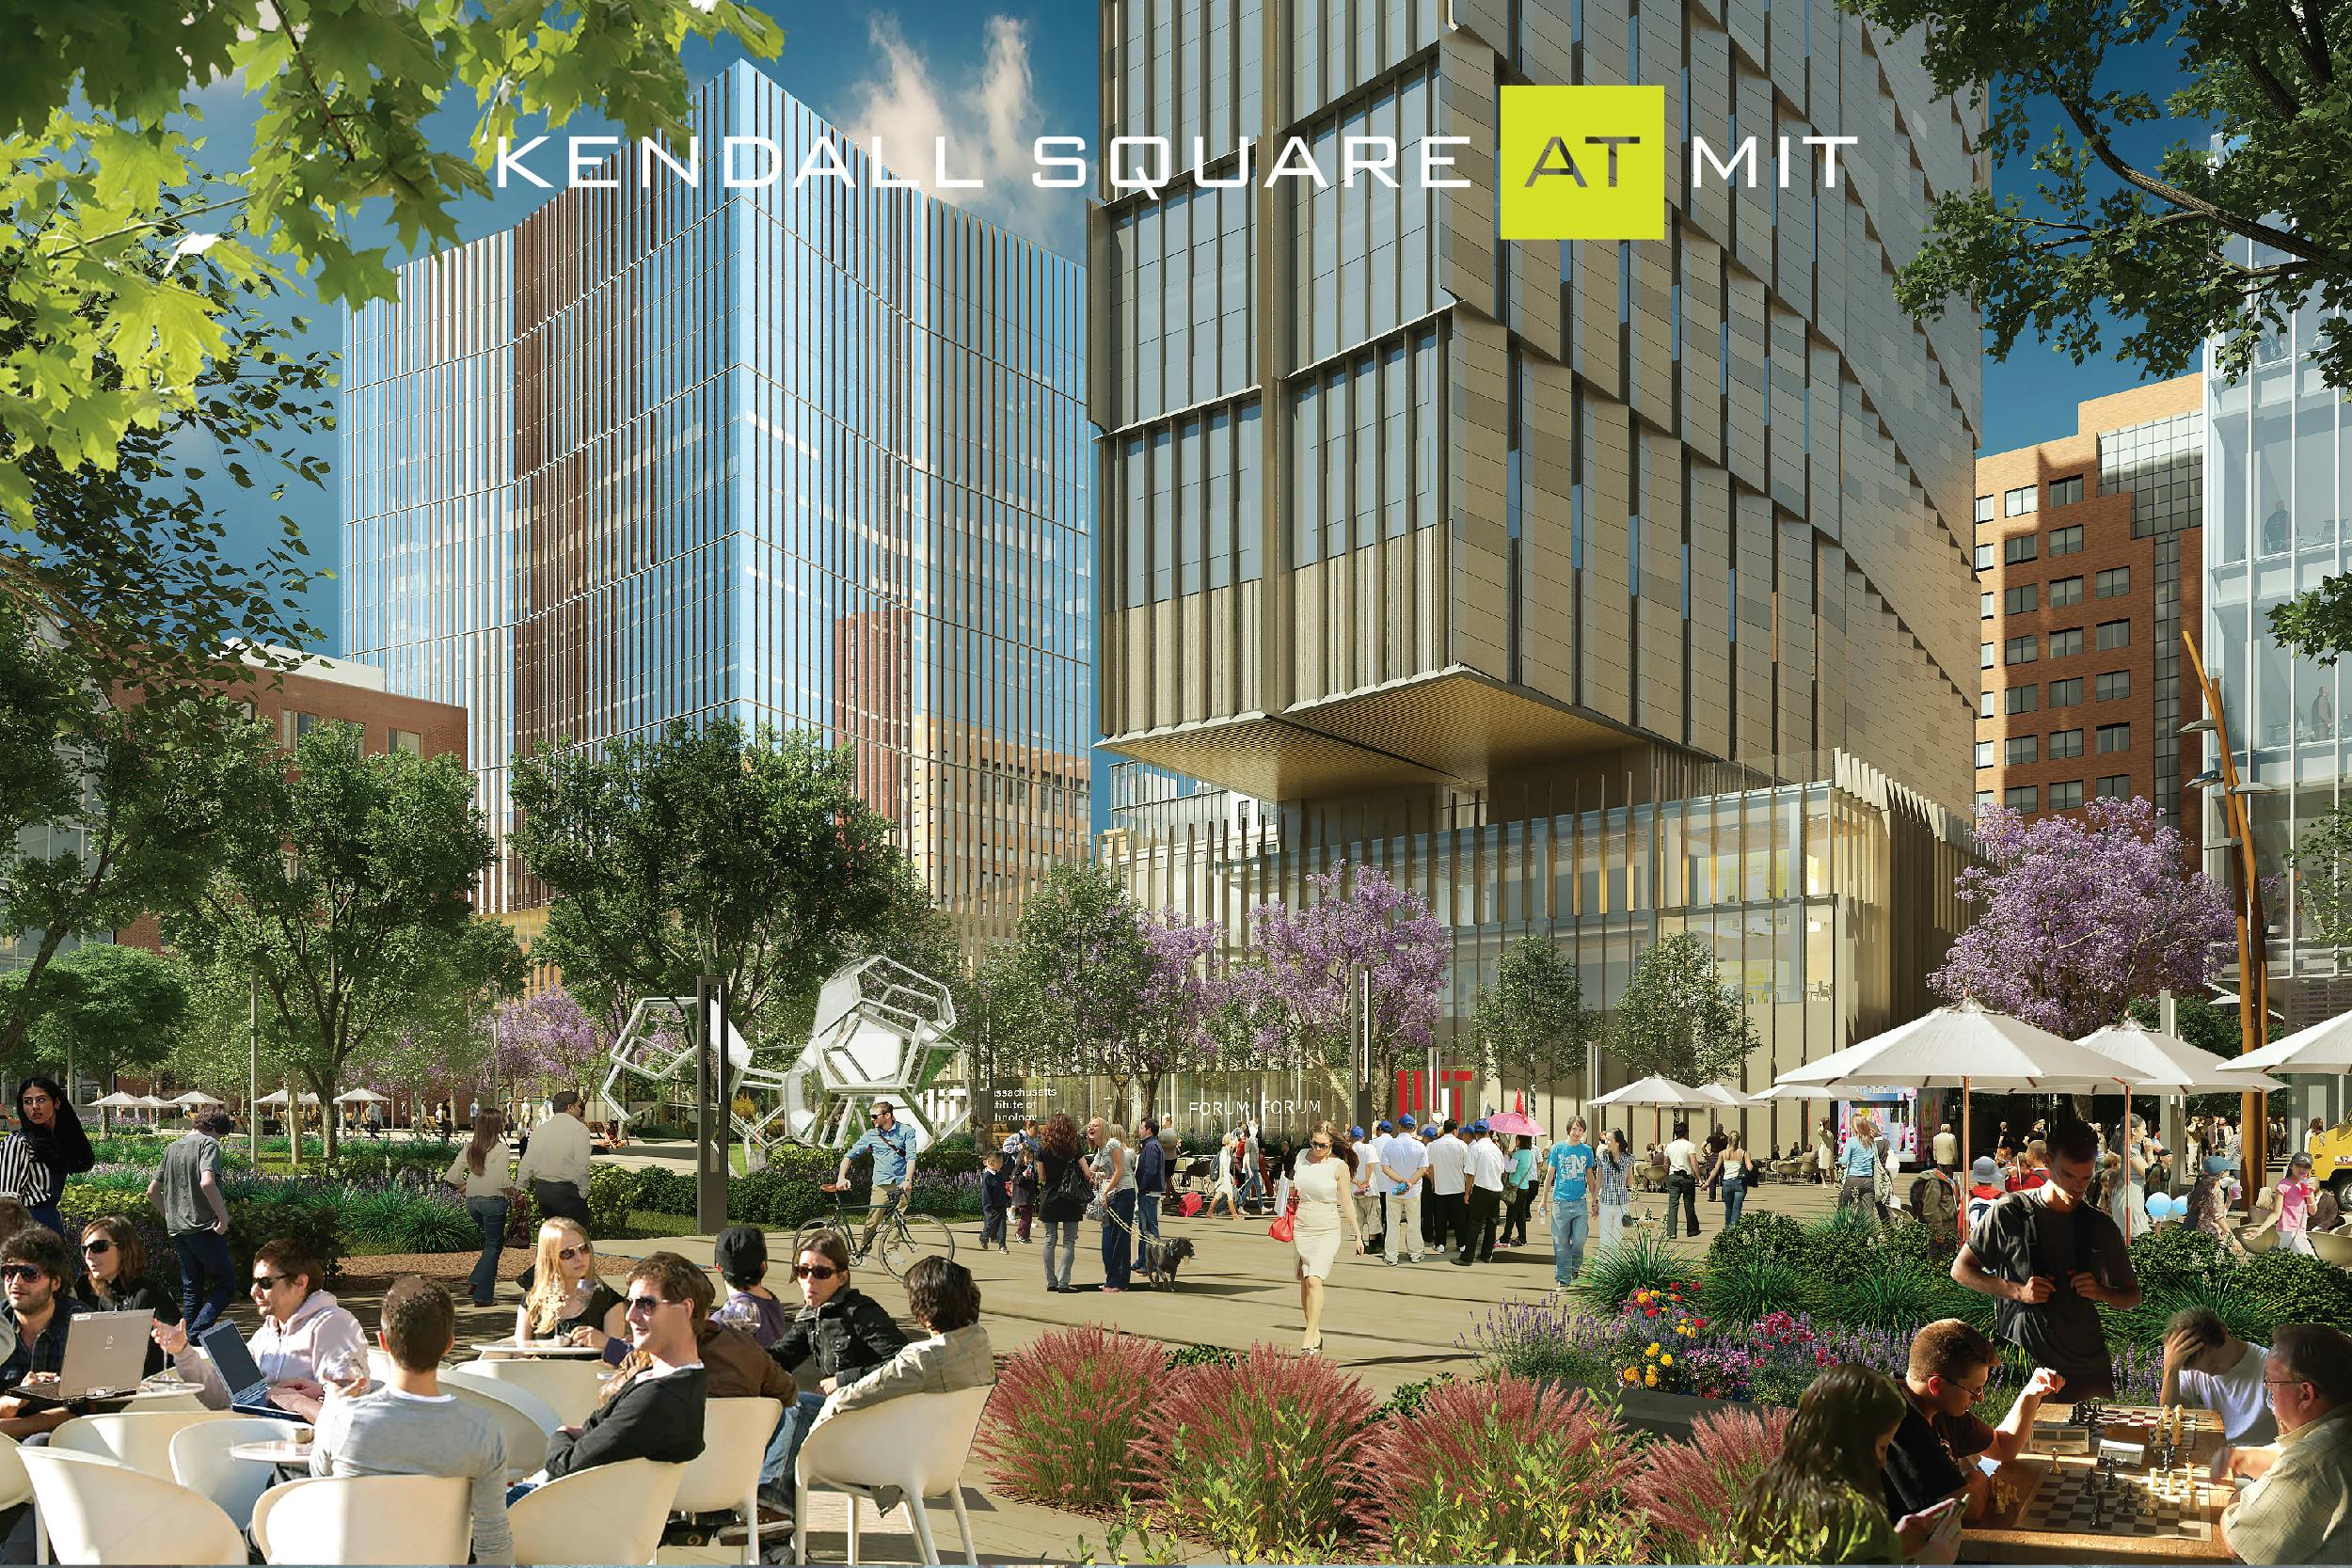 Kendall Square at MIT builfing entrance render with people outside